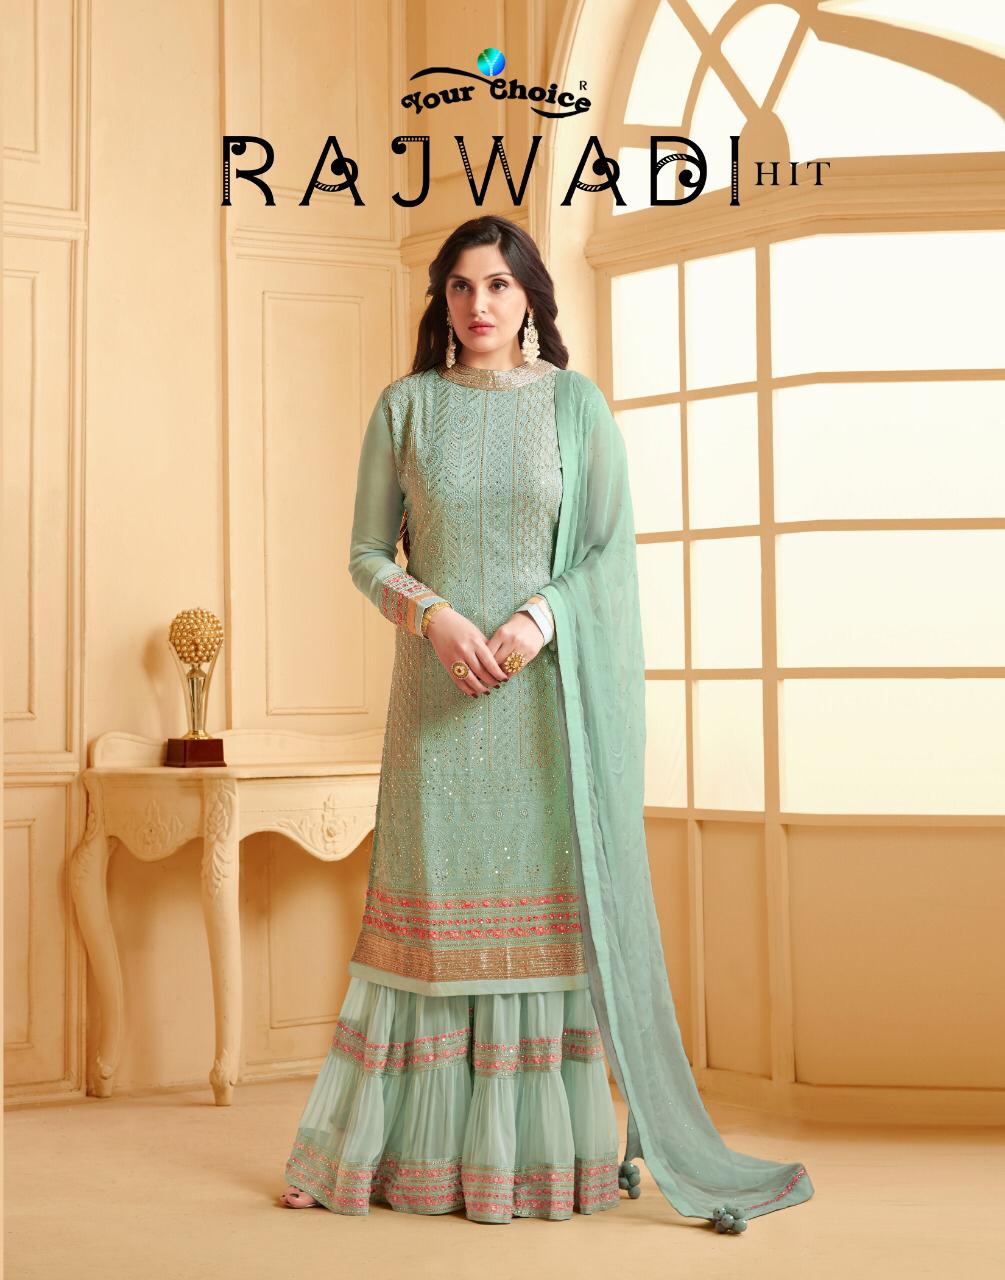 Your Choice Rajwadi Hits Faux Georgette Dress Material At Wh...